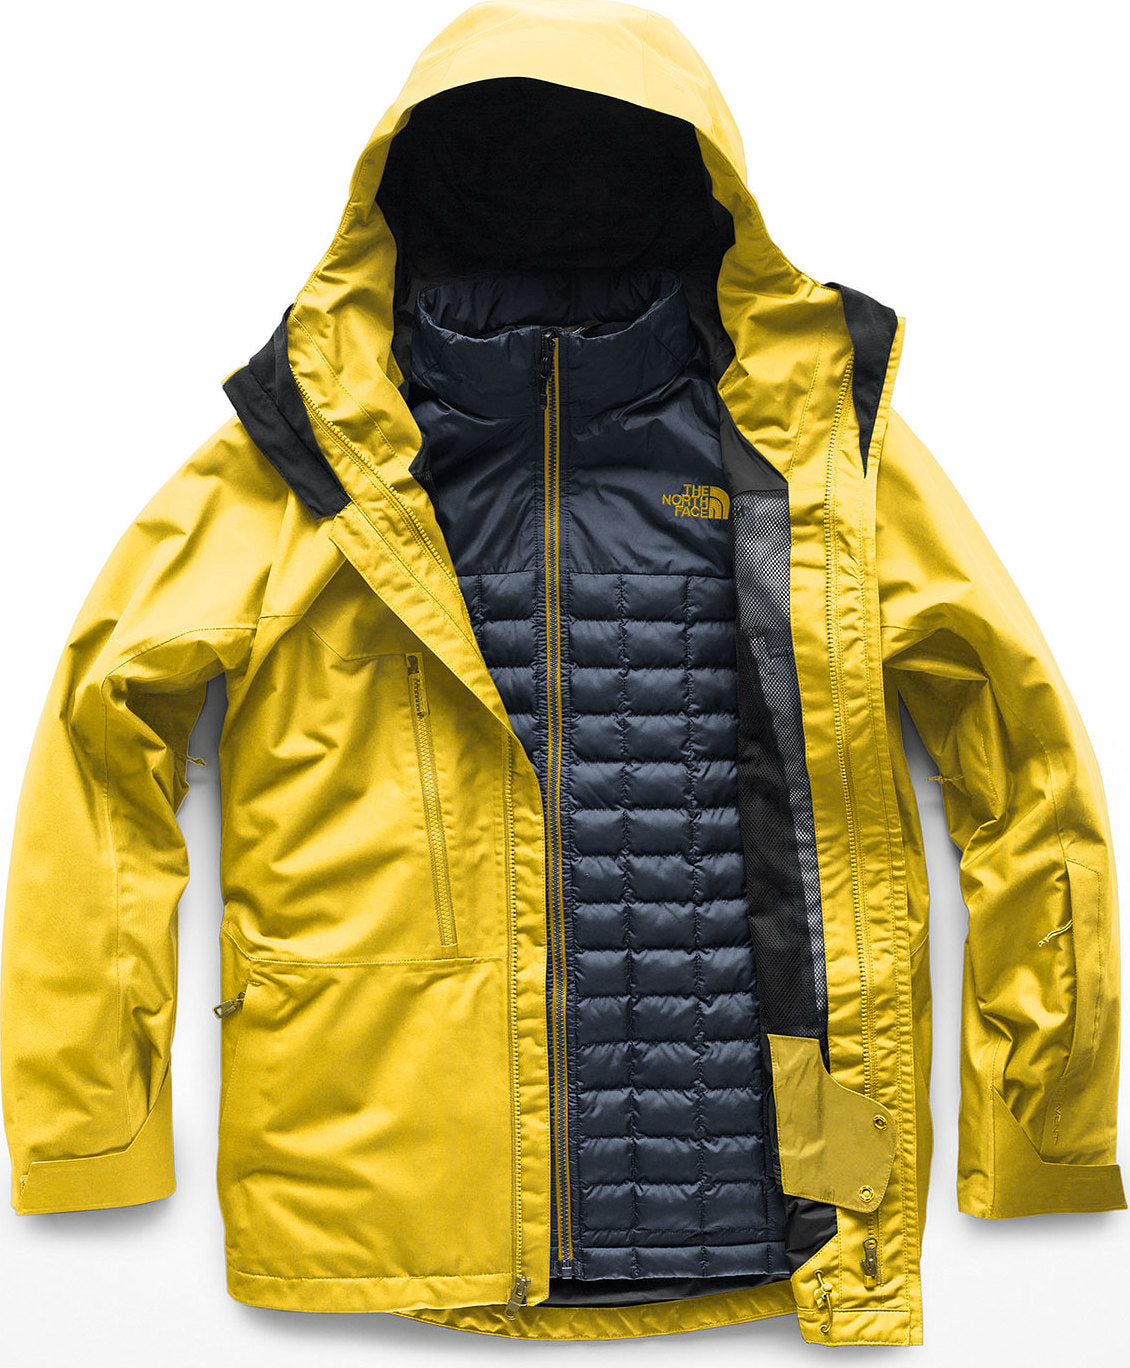 Snow Triclimate Jacket 